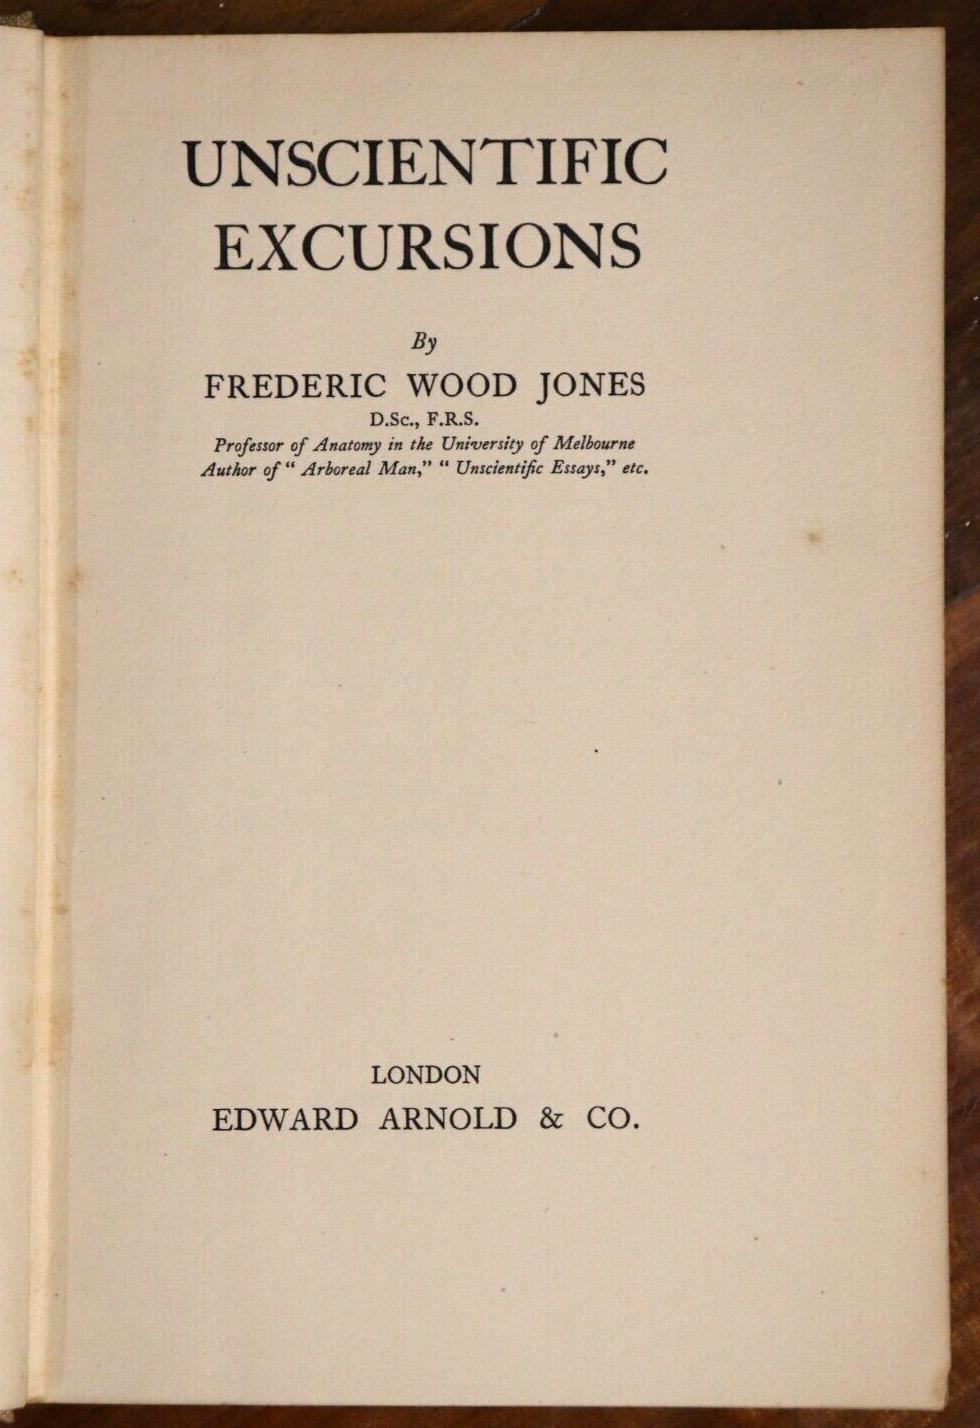 1934 Unscientific Excursions by Frederic Wood Jones 1st Edition Science Book - 0